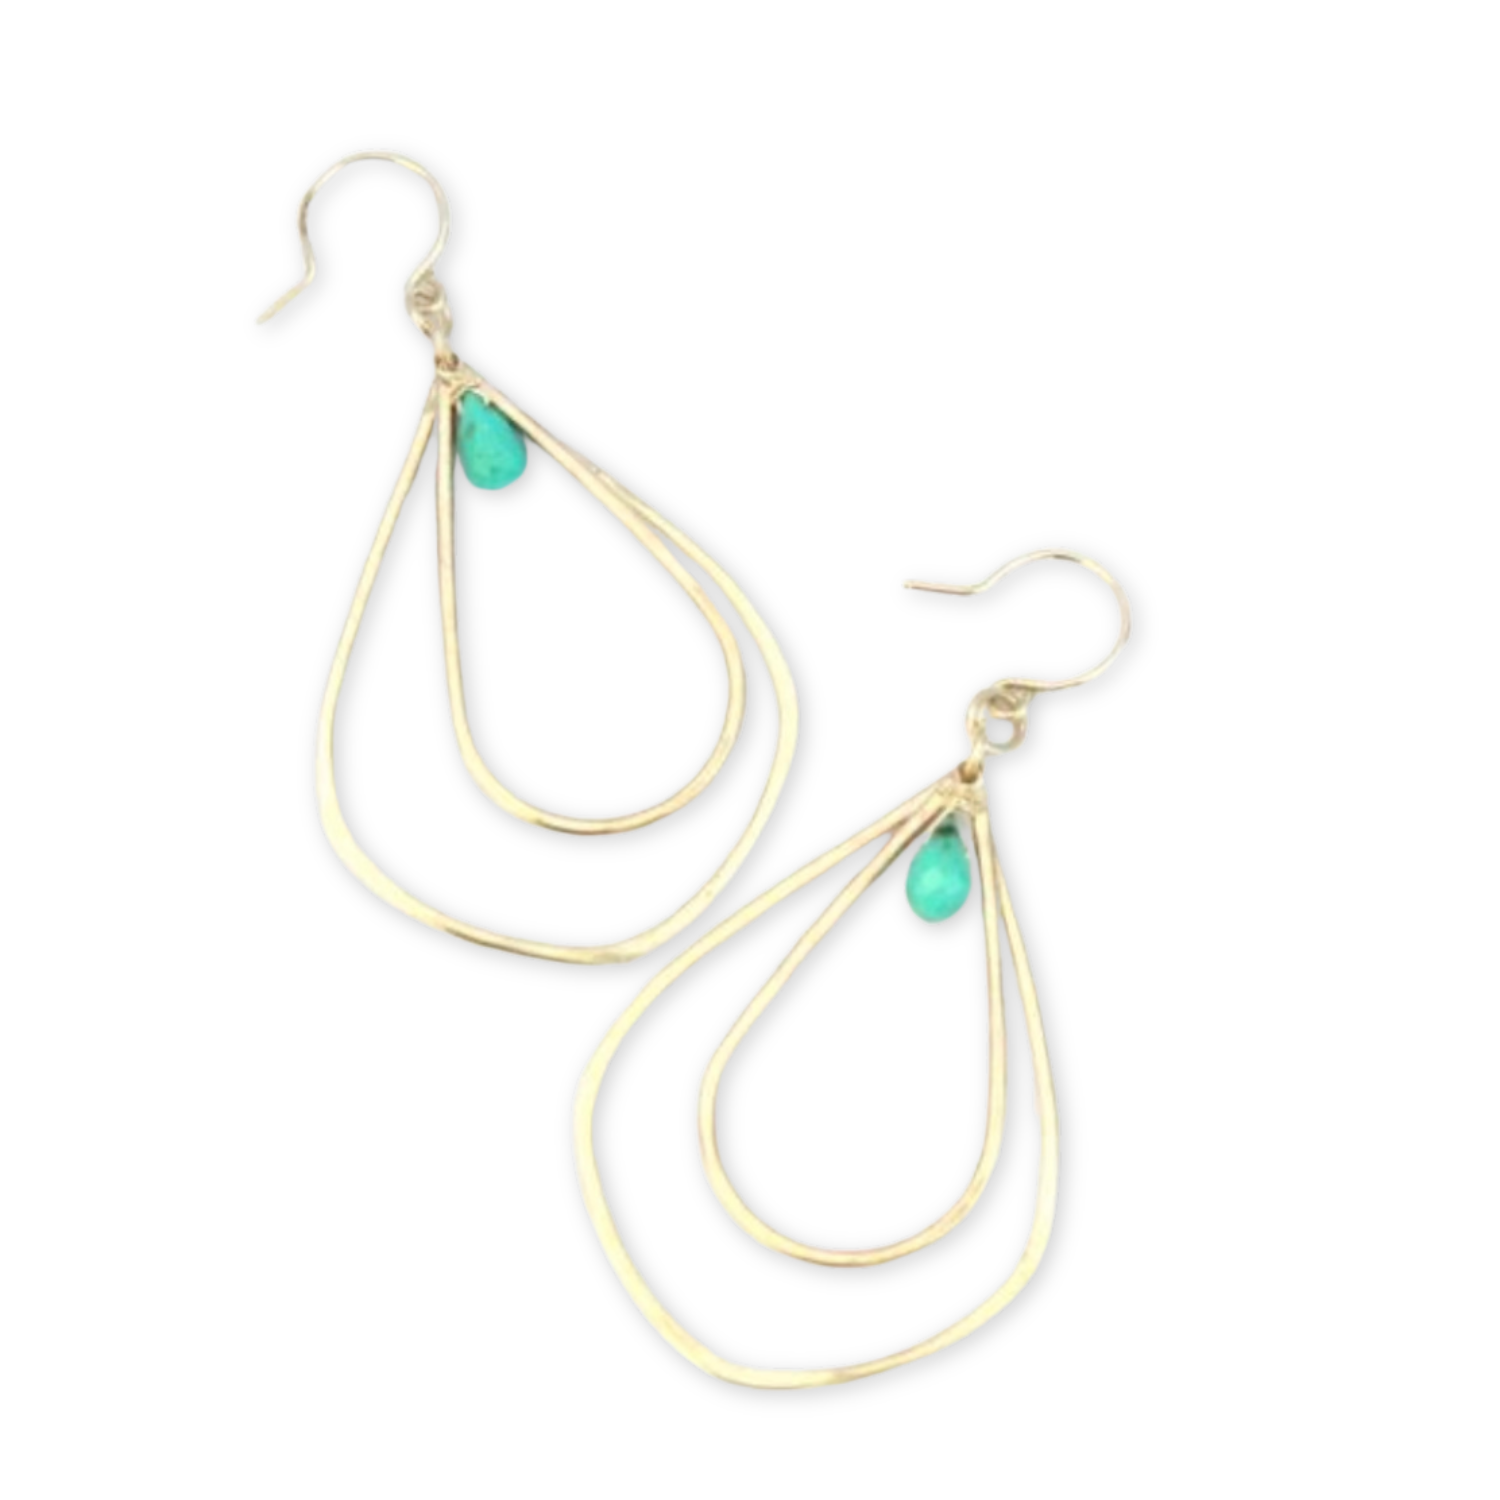 Calla Lilly Earrings With Turquoise